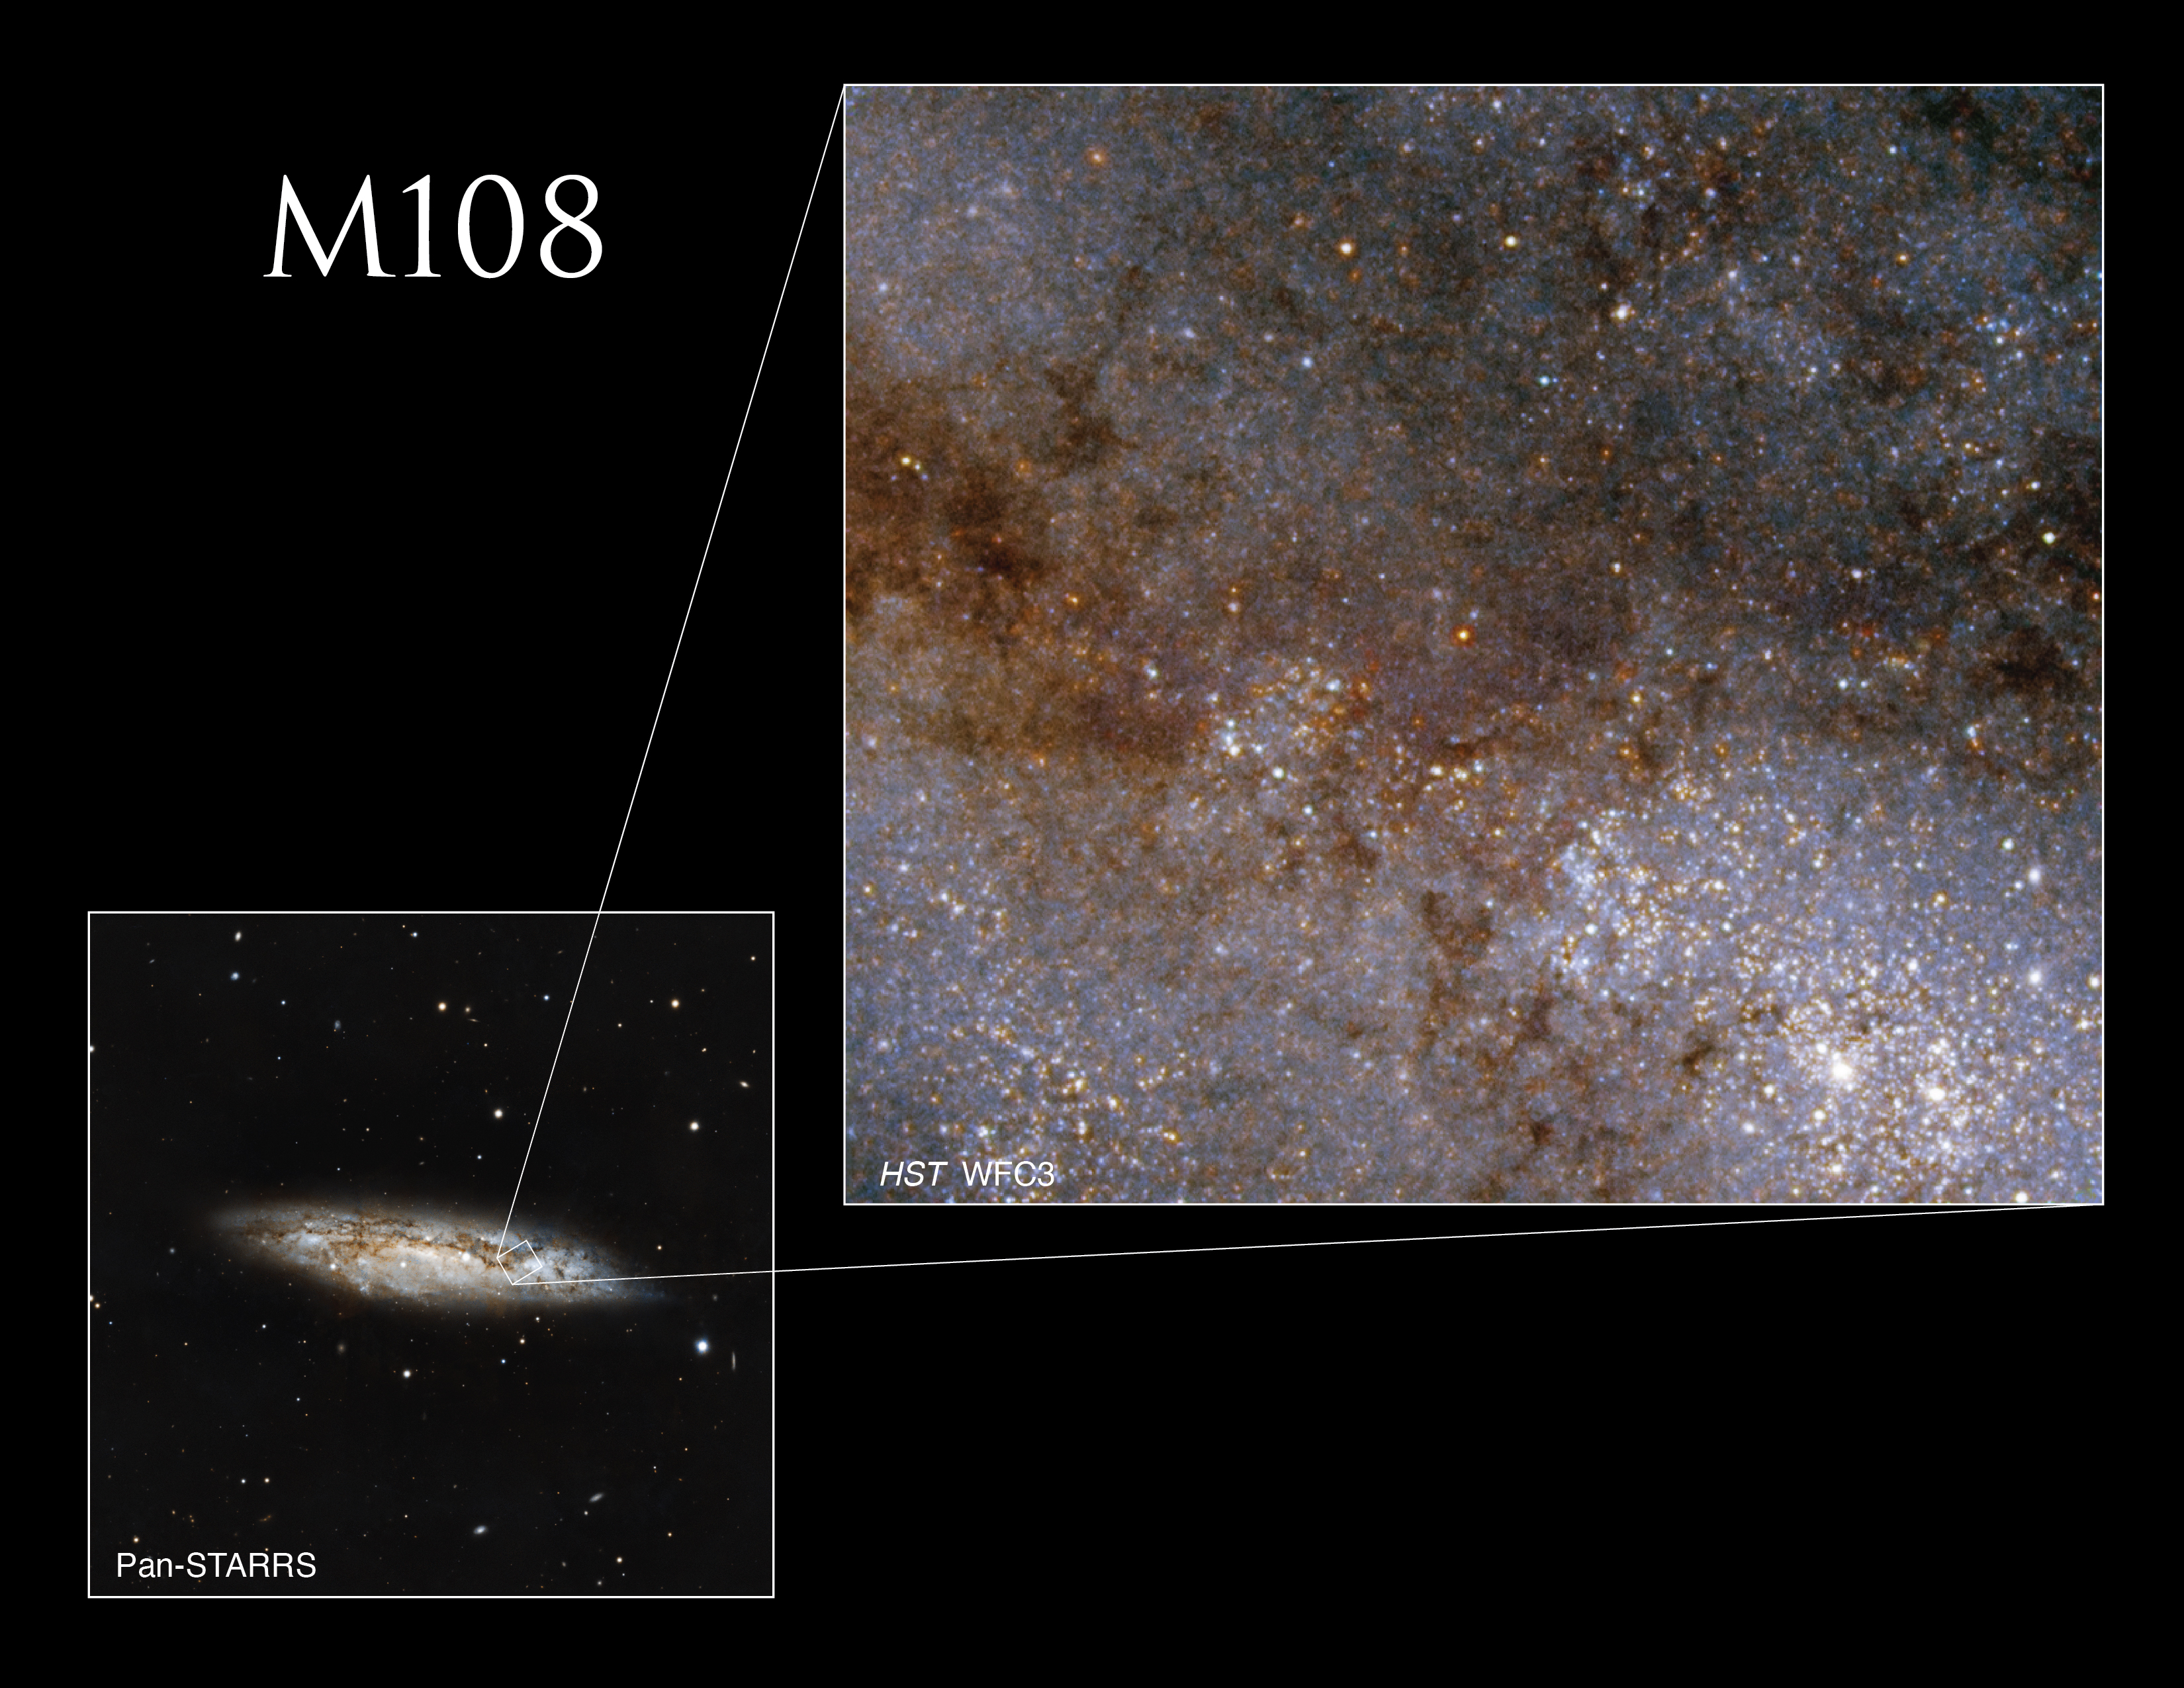 Pan-STARRS Image (lower left): A bright, nearly horizontal galaxy seen edge on against a black background. A the white square indicates the area of the galaxy in the Hubble image. Hubble Image (upper right): Bright stars scatter across the field of view, more closely concentrated at the lower right. Dark brown lanes of dust spread throughout the view.